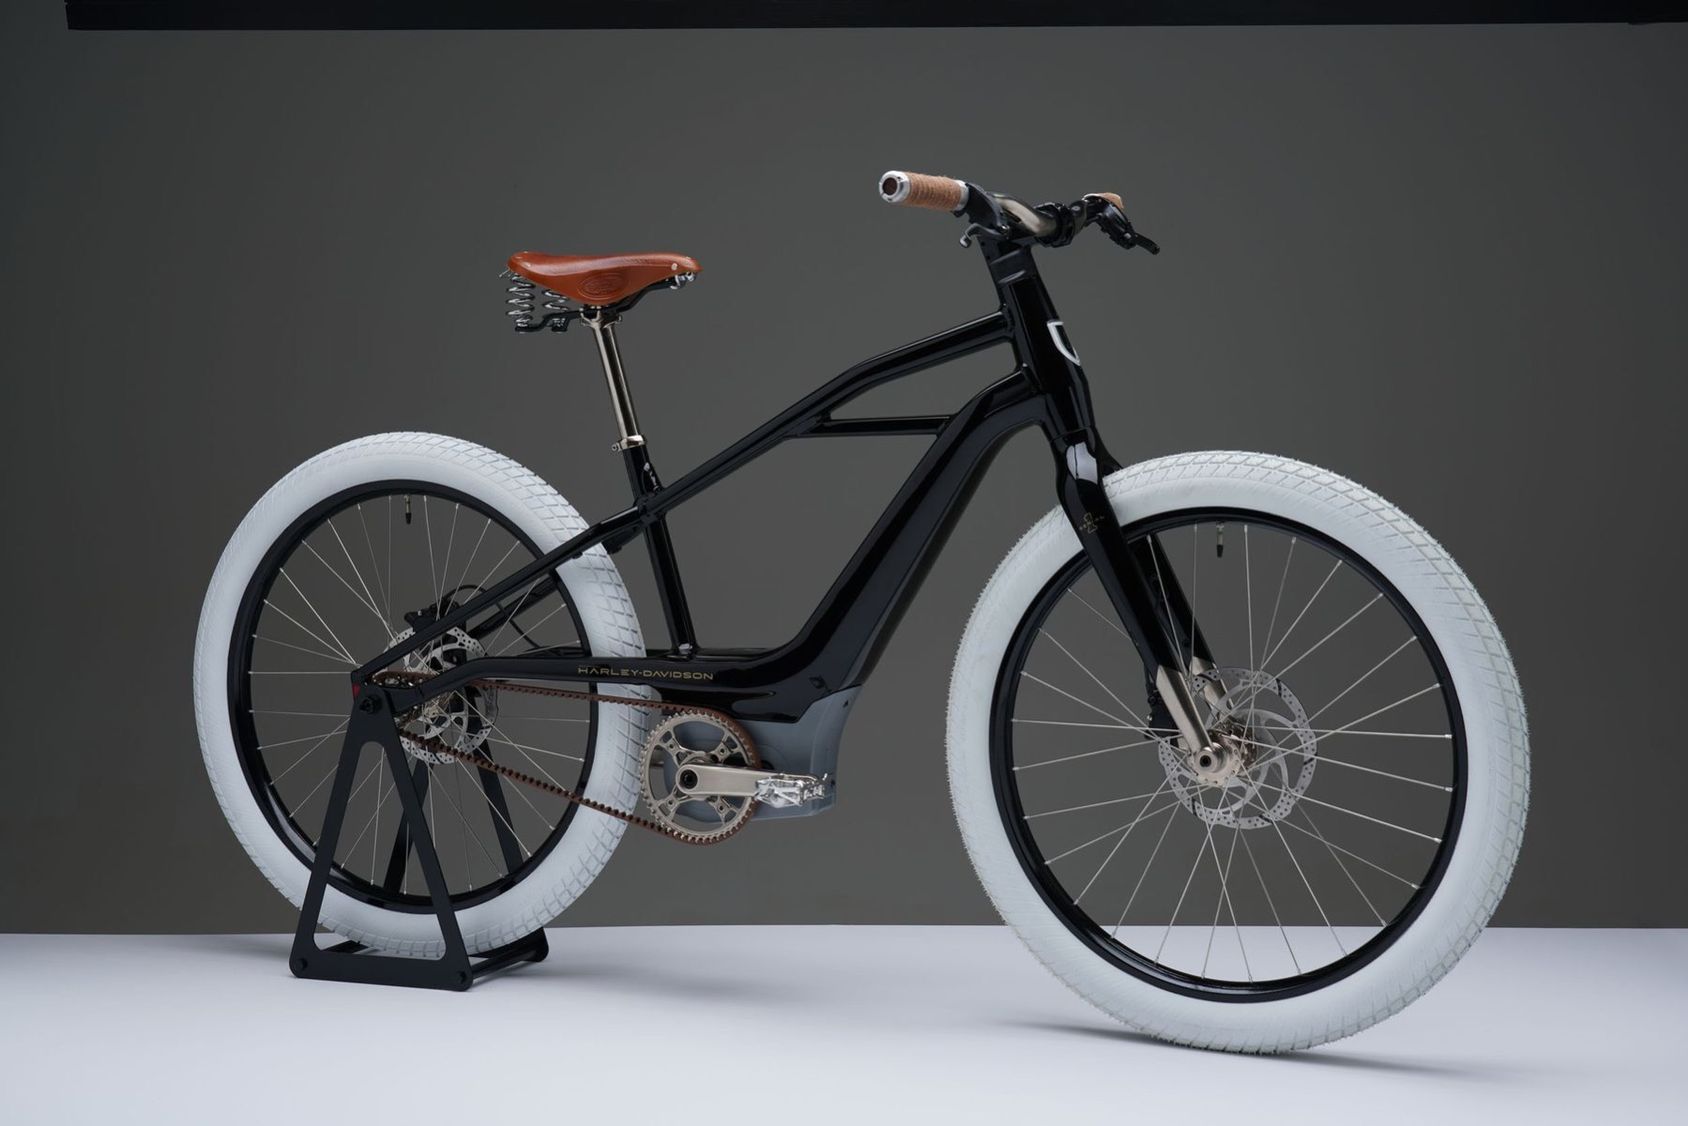 Harley-Davidson launches electric bike brand – the Serial 1